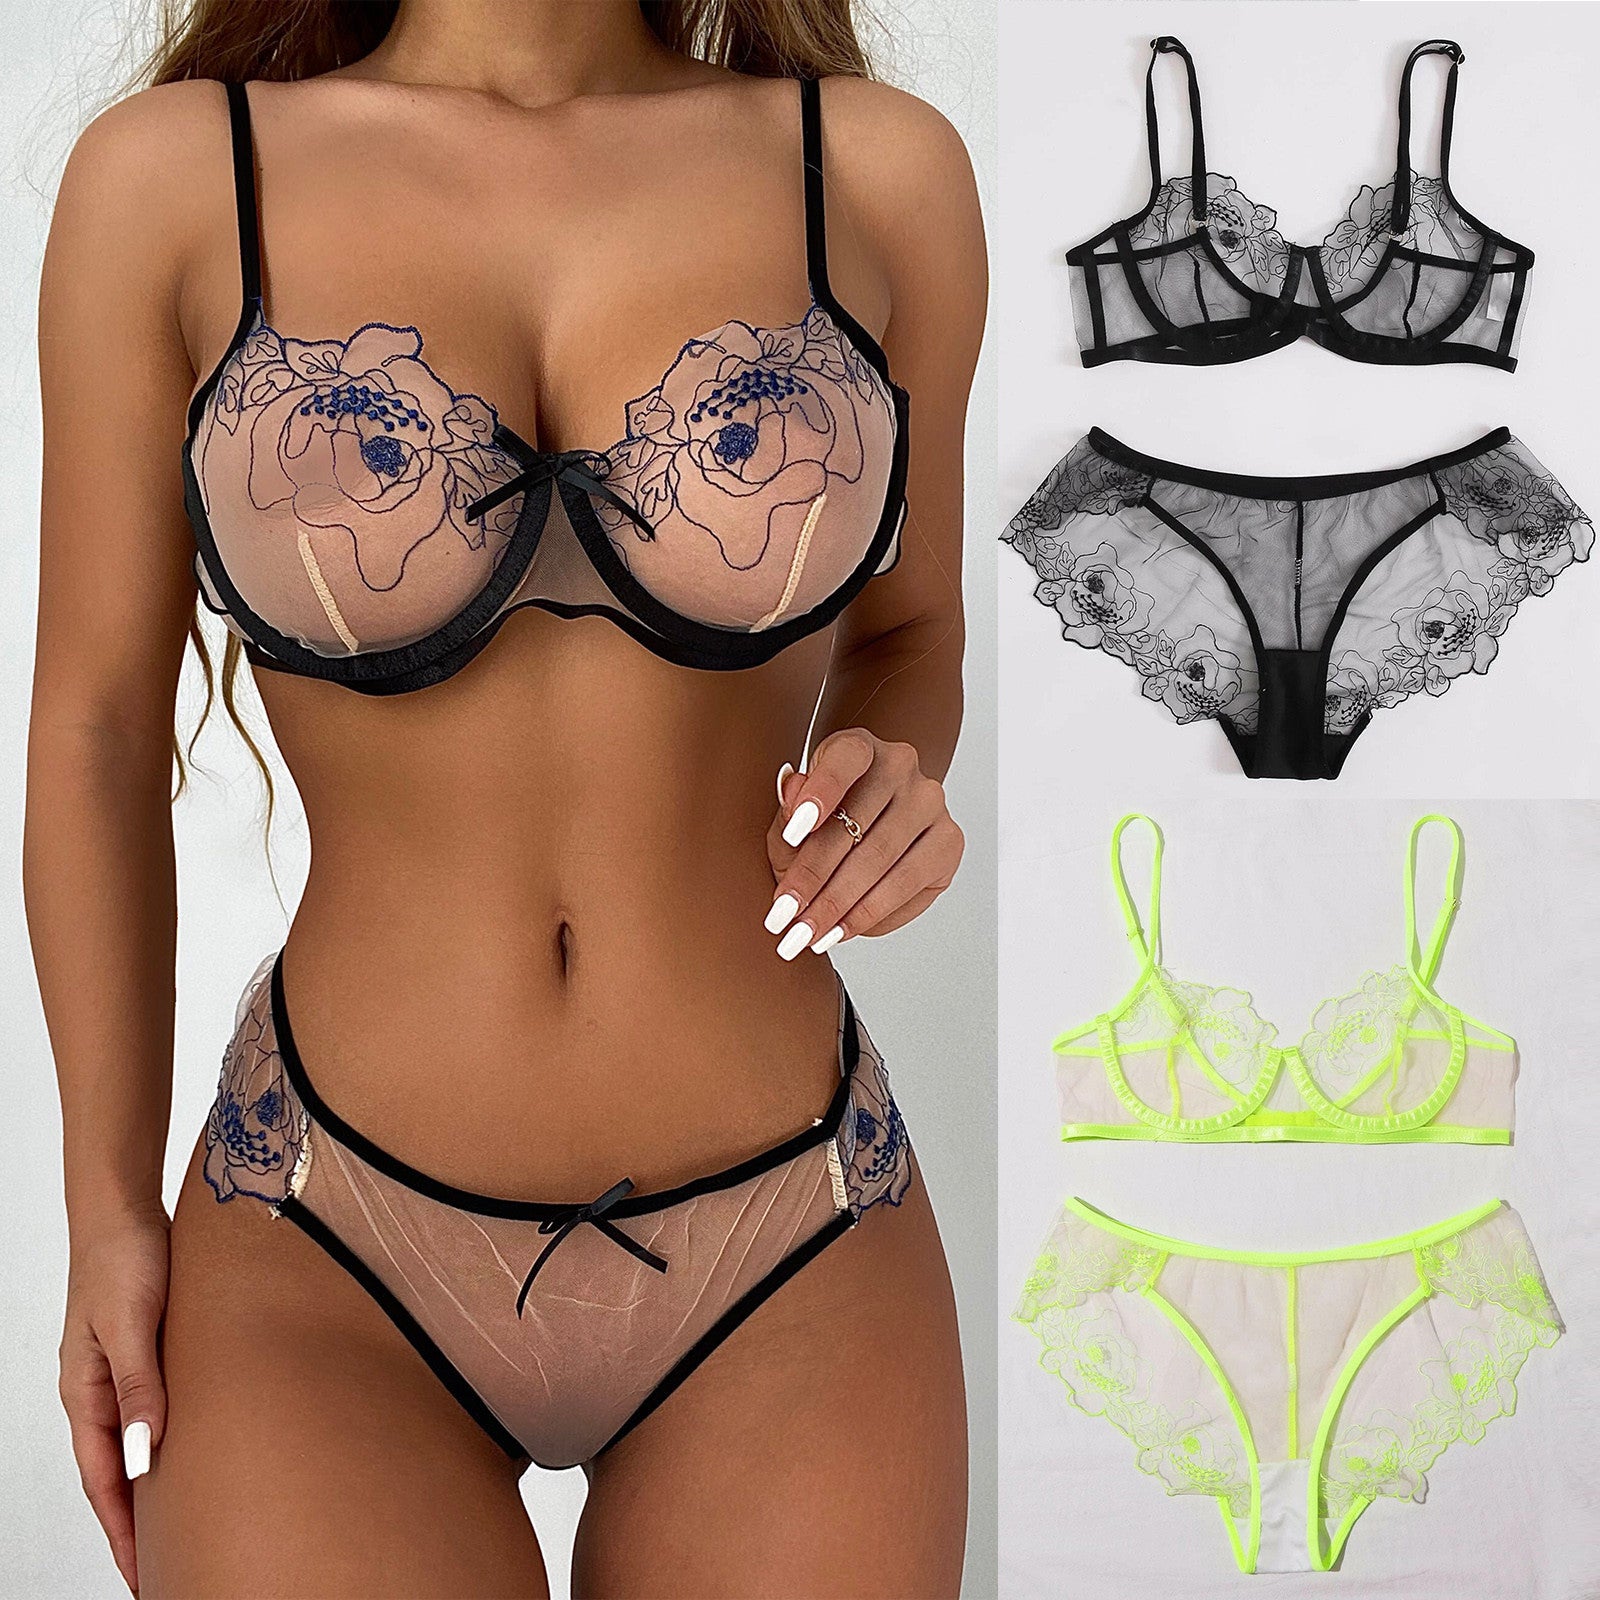 Sheer Bra and Panty Set,embroidered Lingerie Set,see Through Bra